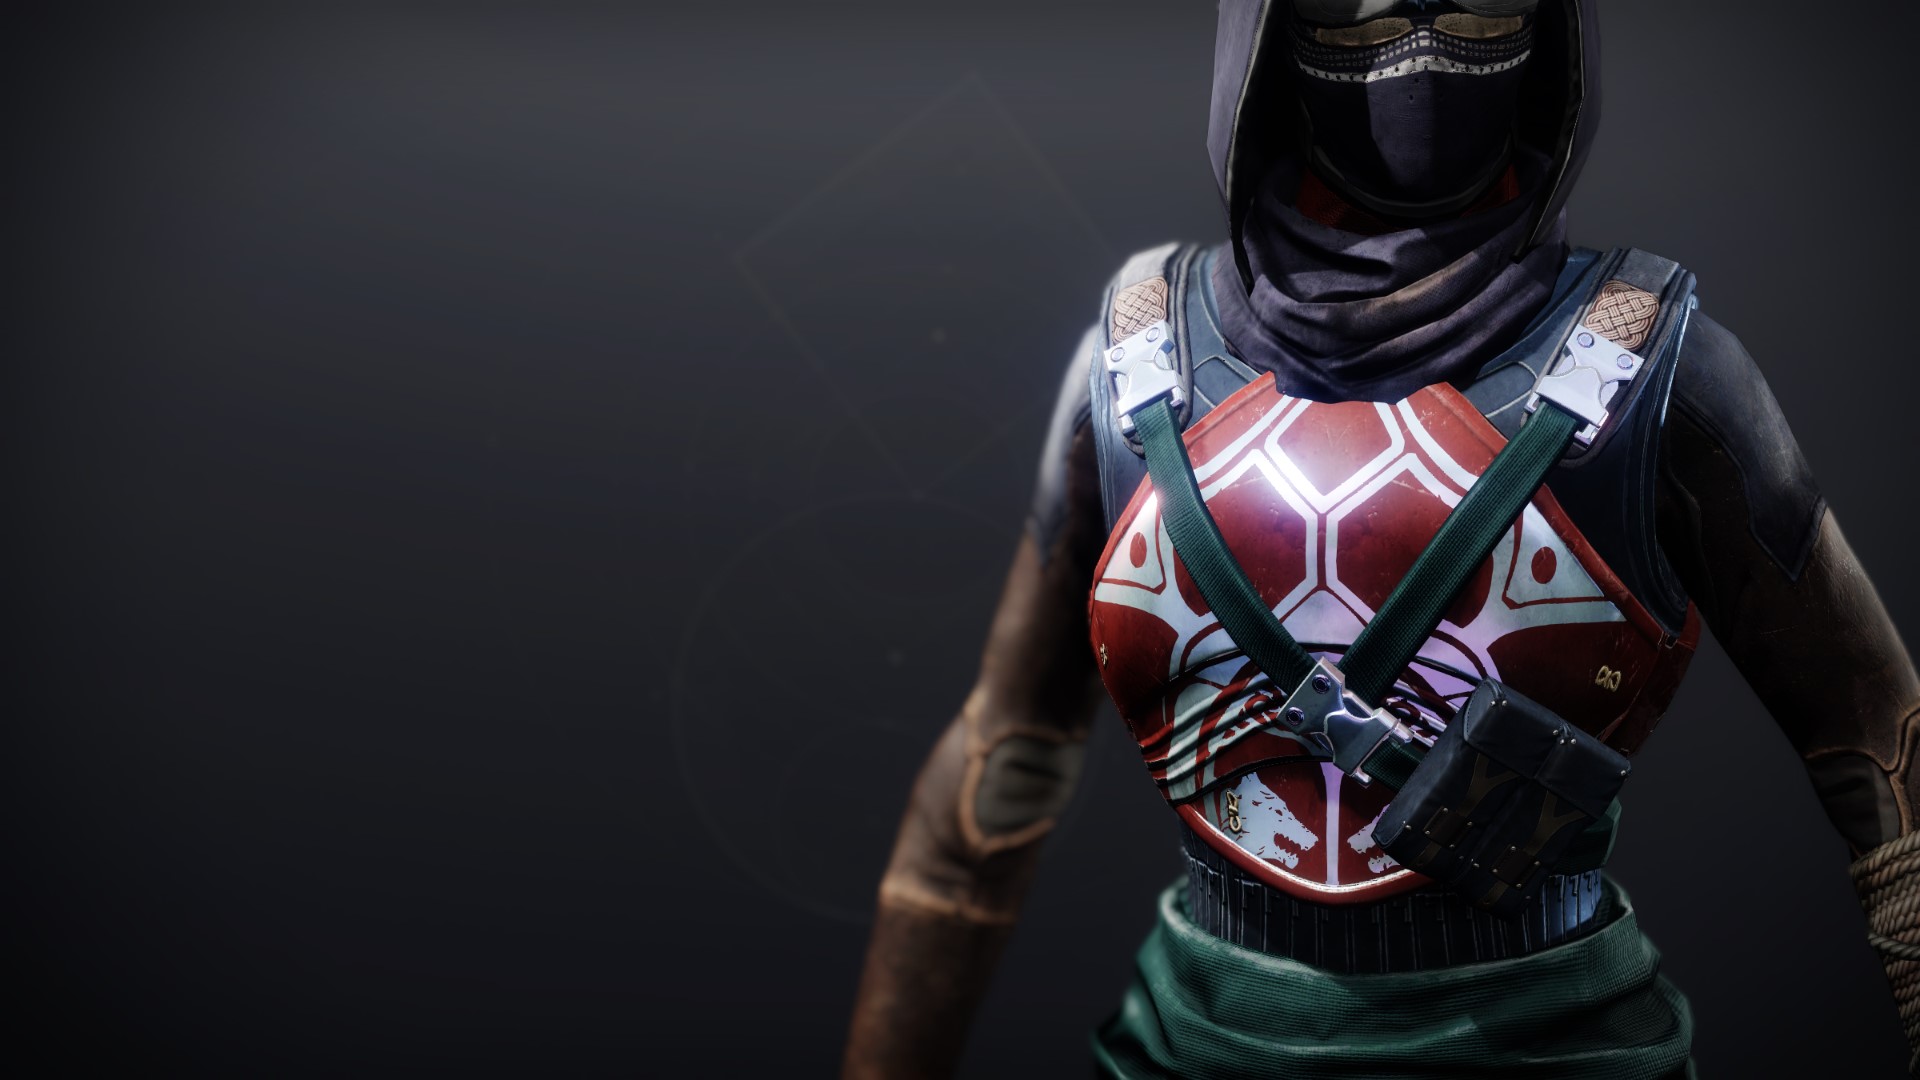 An in-game render of the Iron Symmachy Vest.